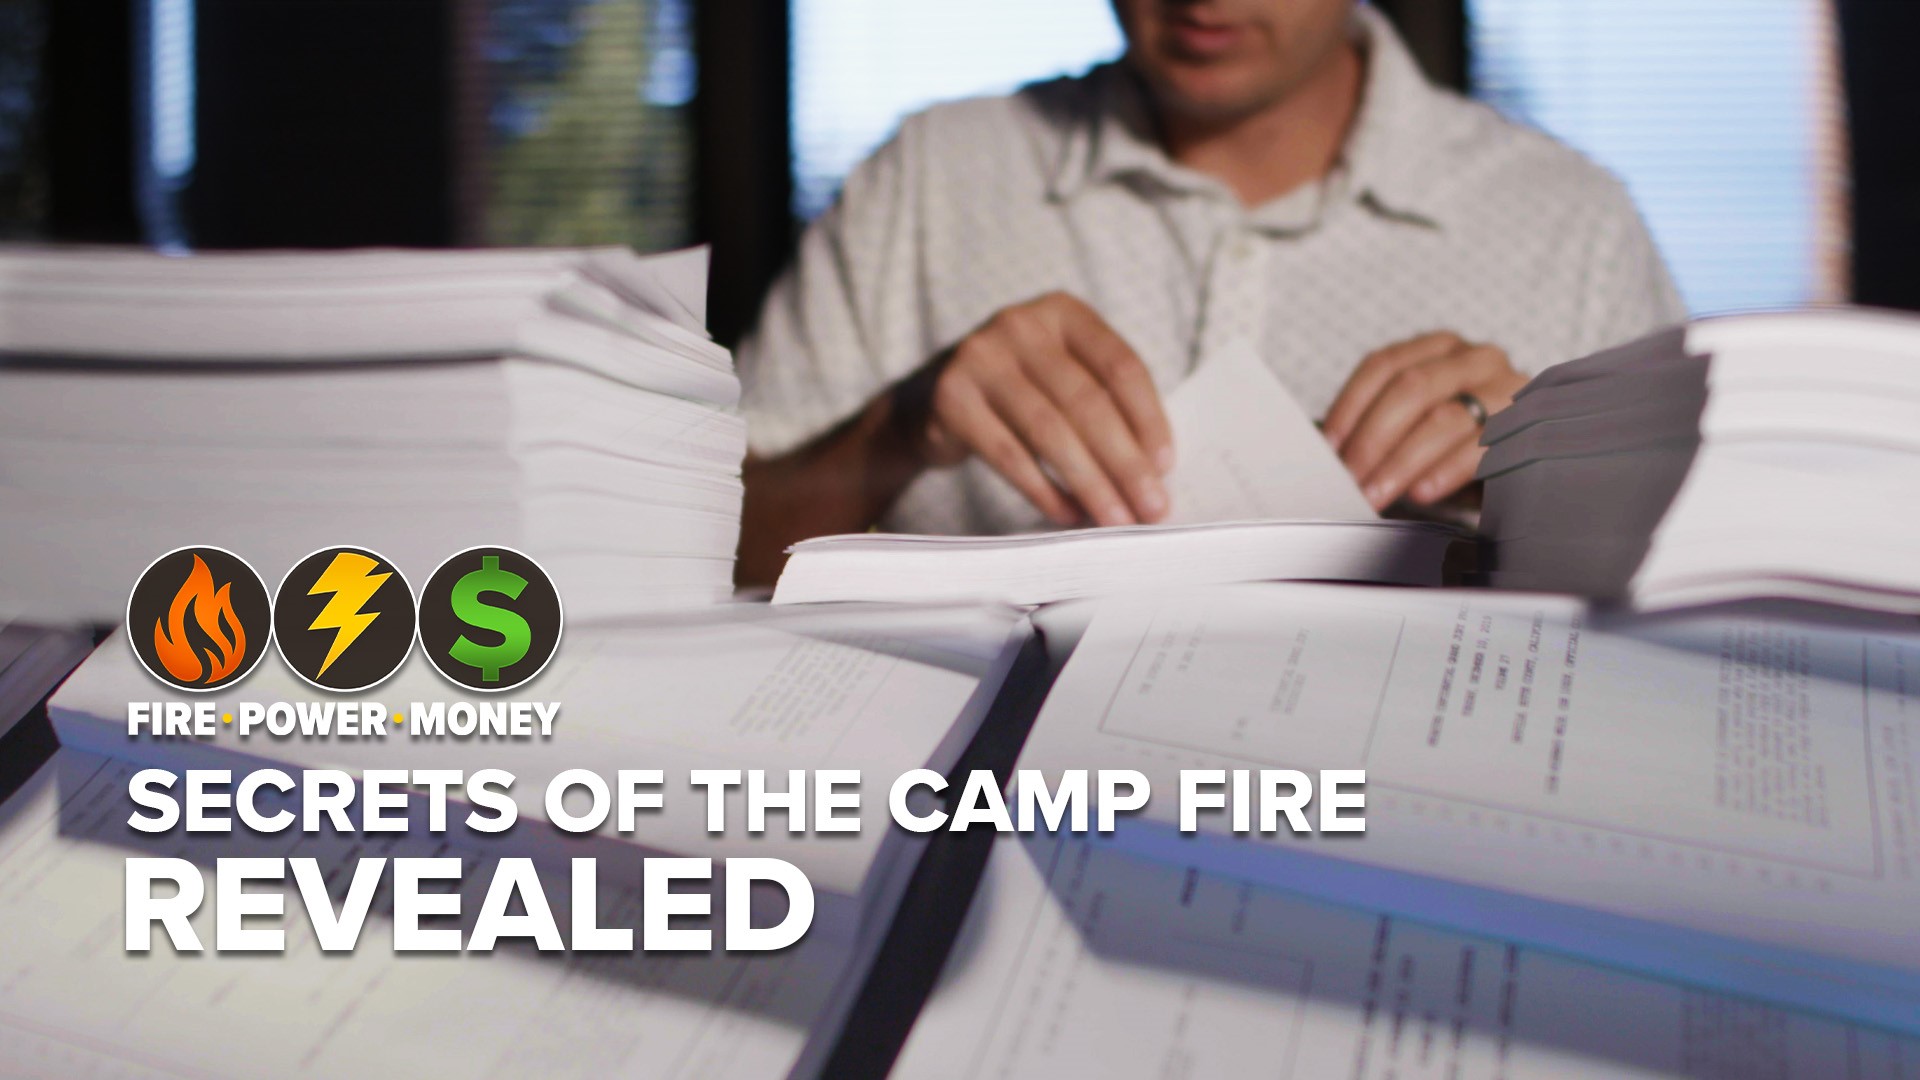 After fighting for the public’s right to know, ABC10 is releasing thousands of pages of grand jury records, detailing PG&E’s crimes in the 2018 Camp Fire.